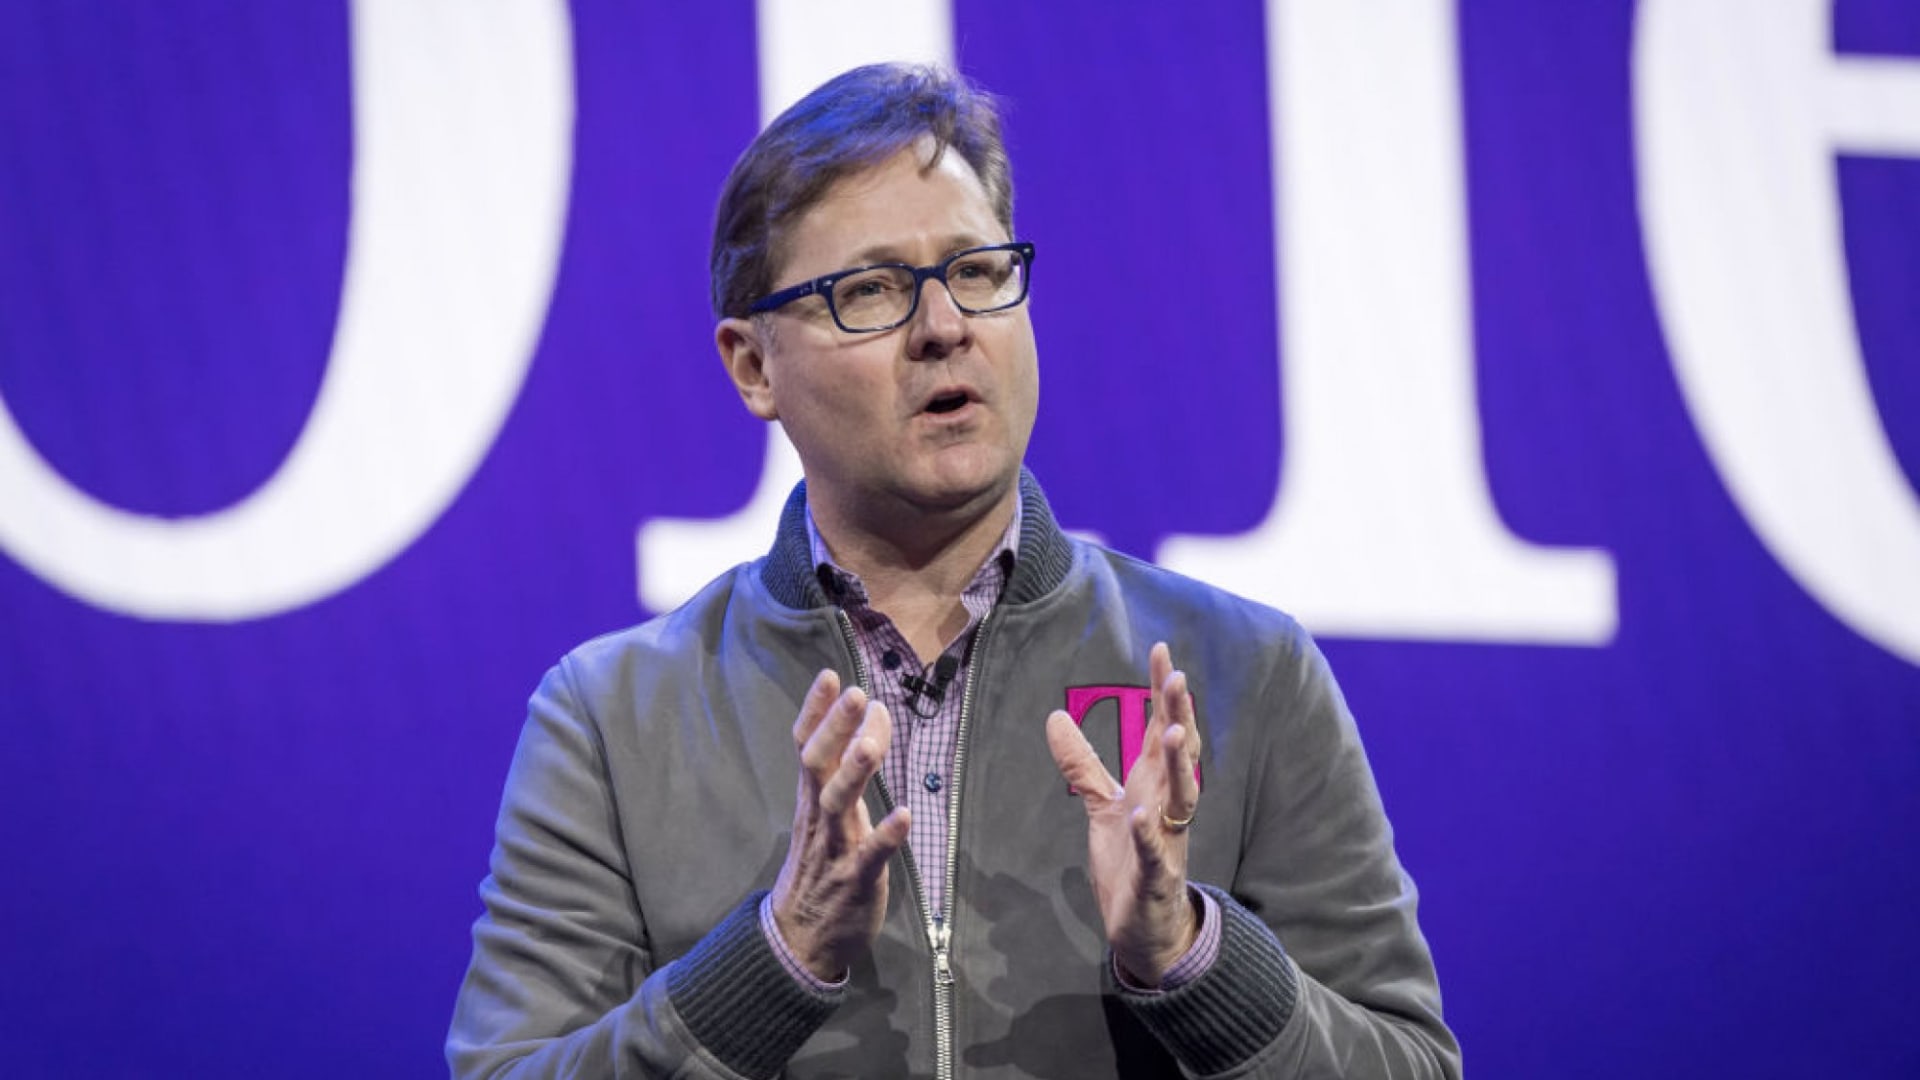 T-Mobile's CEO Apologized For The Massive Data Breach Affecting 50 Million People. This 1 Word Stuck Out the Most